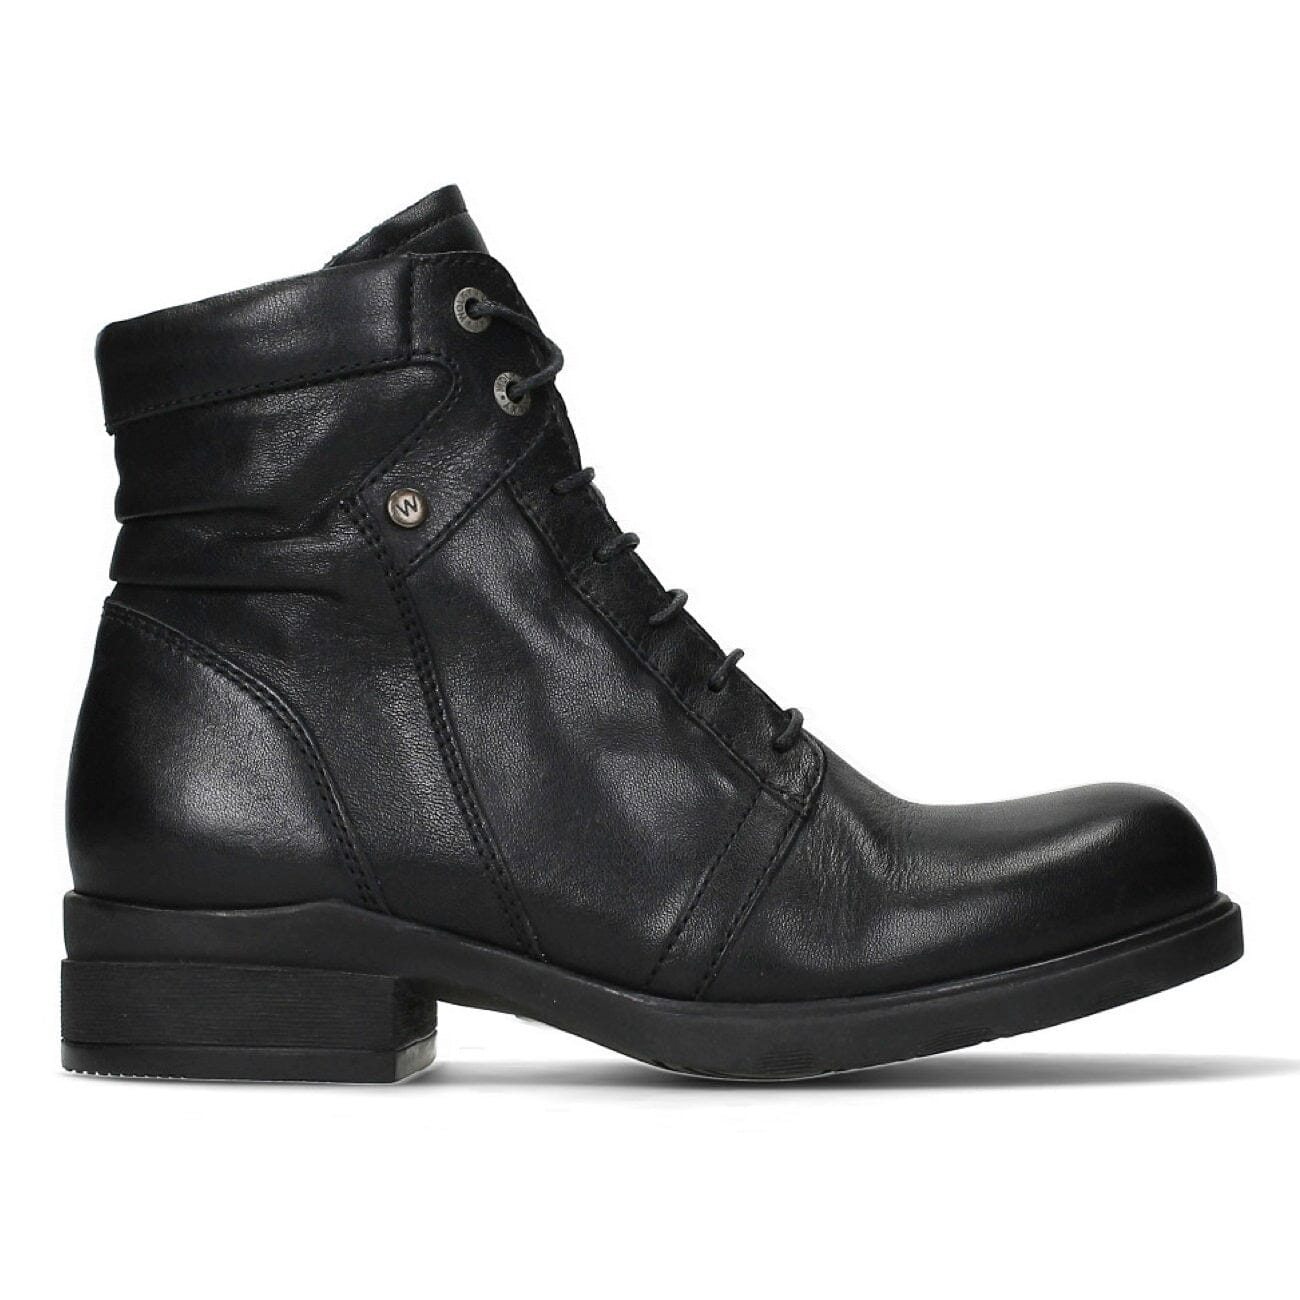 Wolky, Center XW, Boots, Velvet Leather, Black Boots Wolky Black 36 